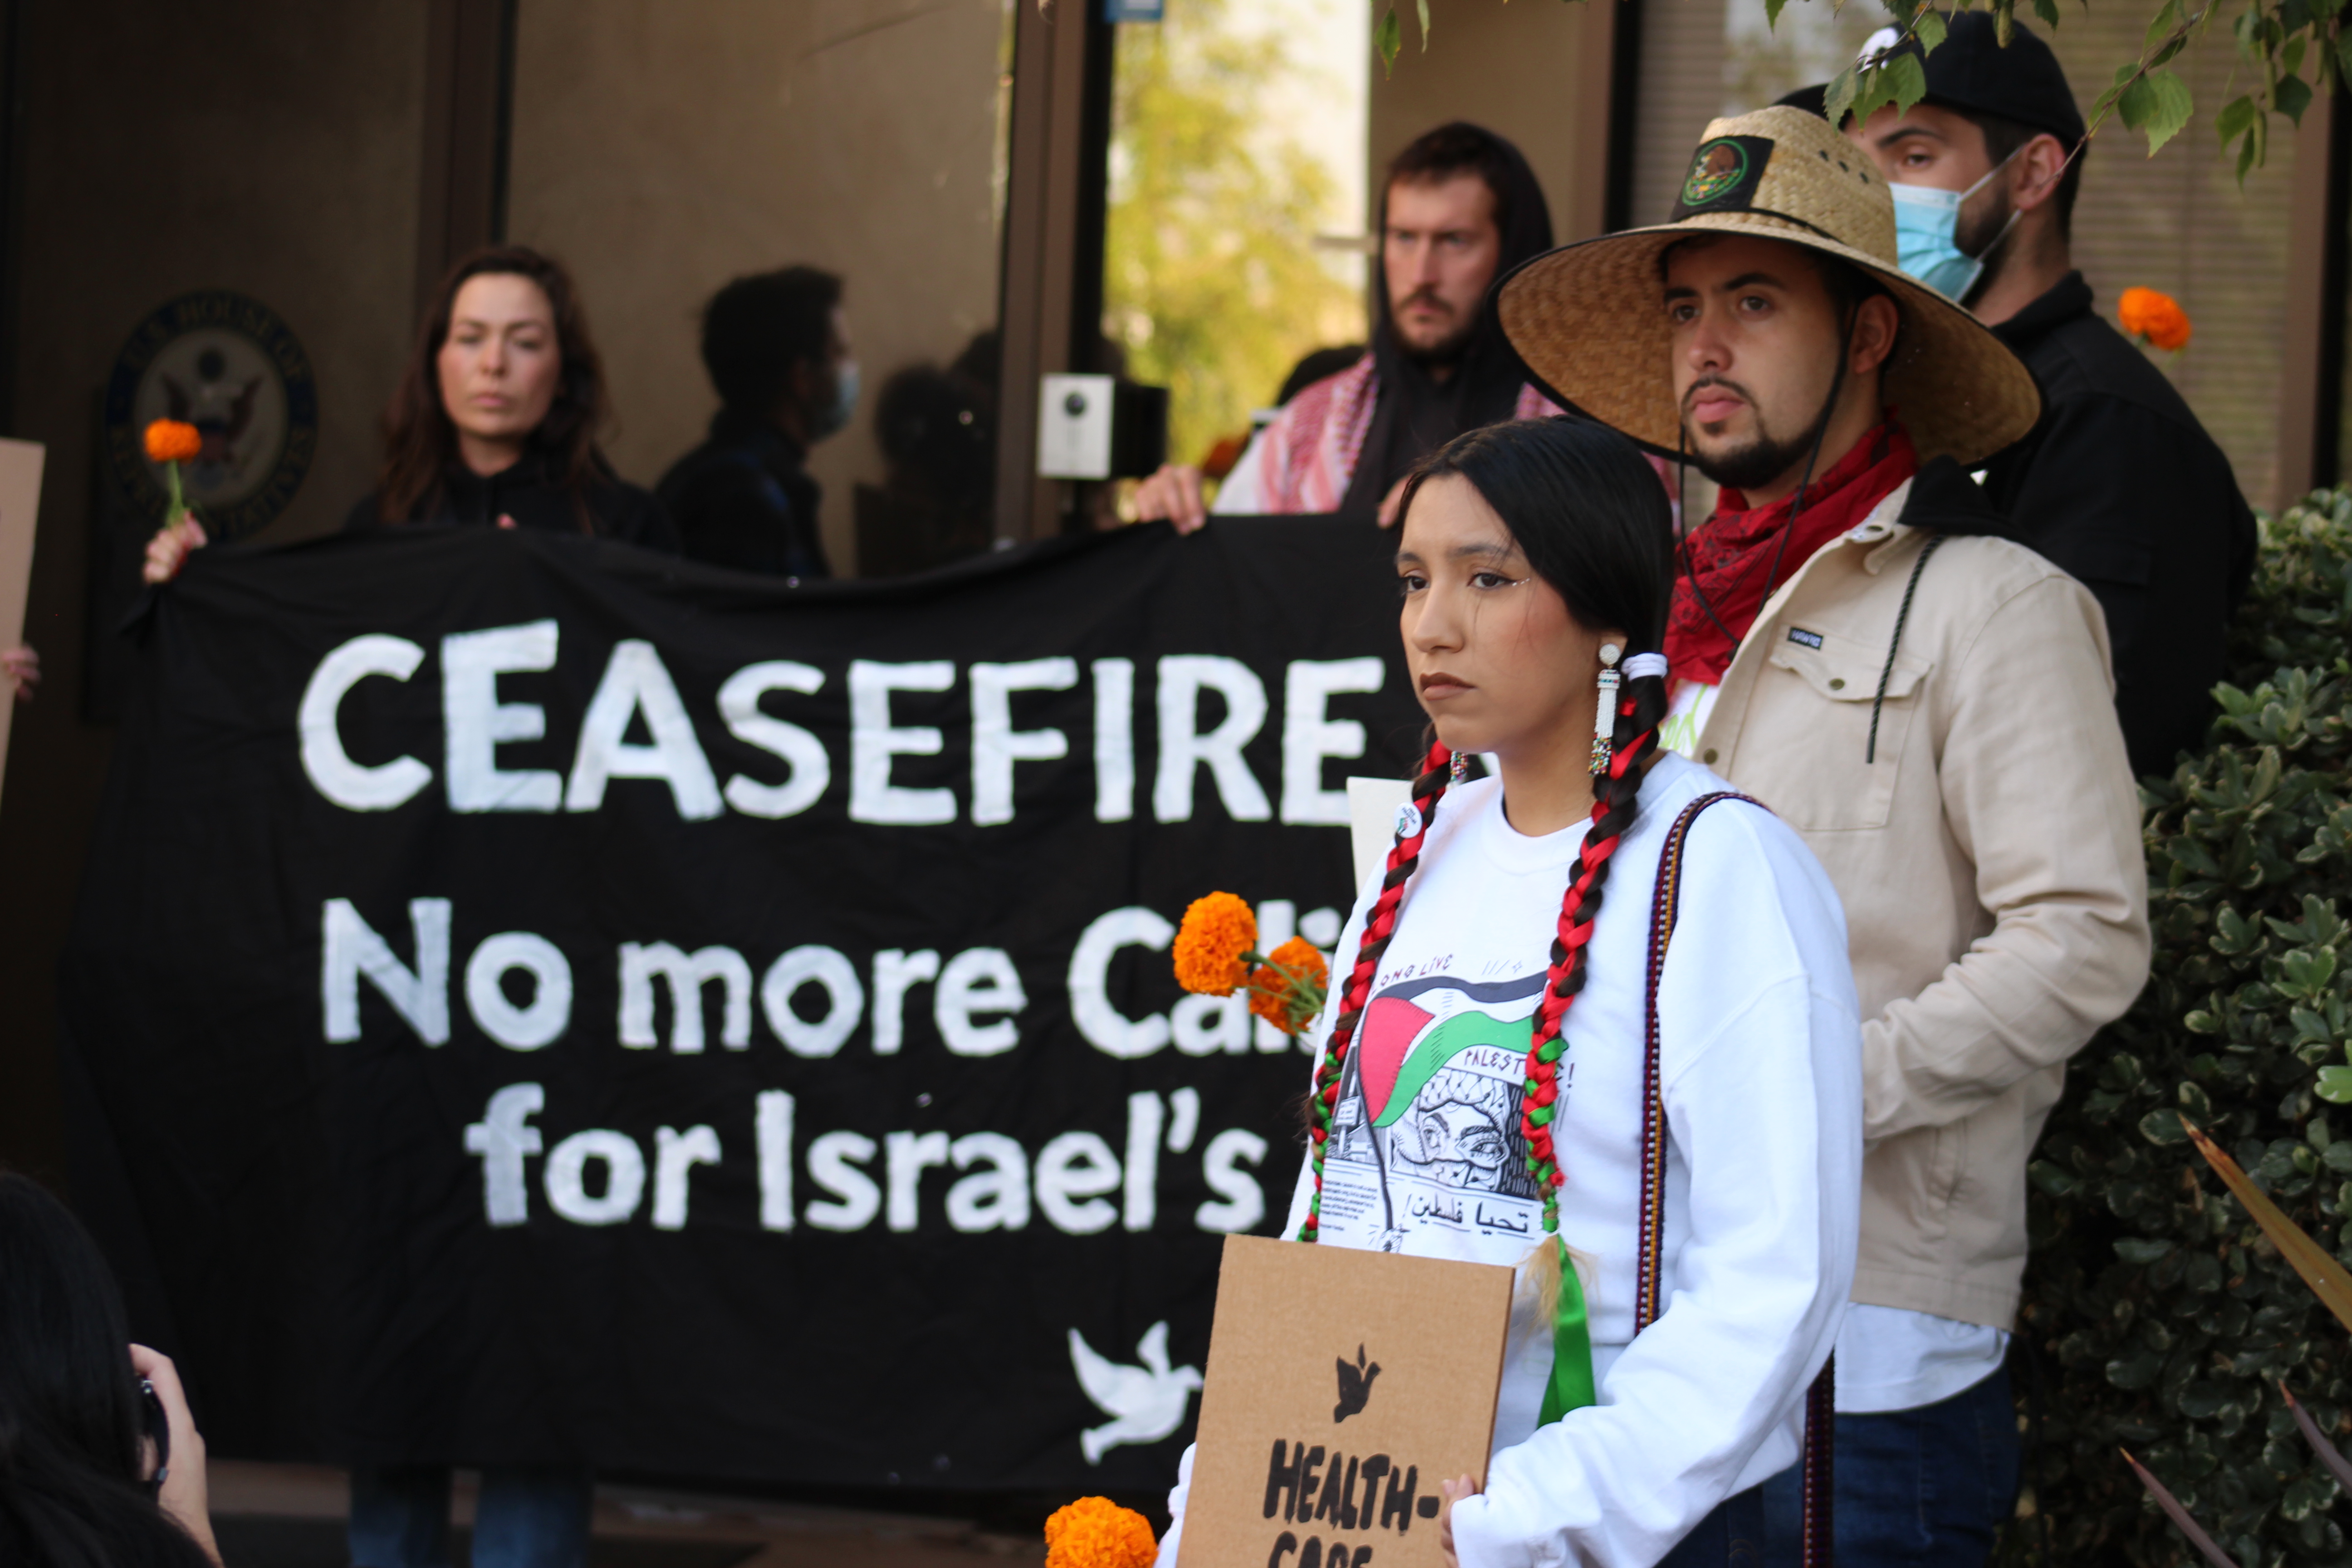 Pro-Palestinian demonstrators at Rep. Eric Swalwell's office